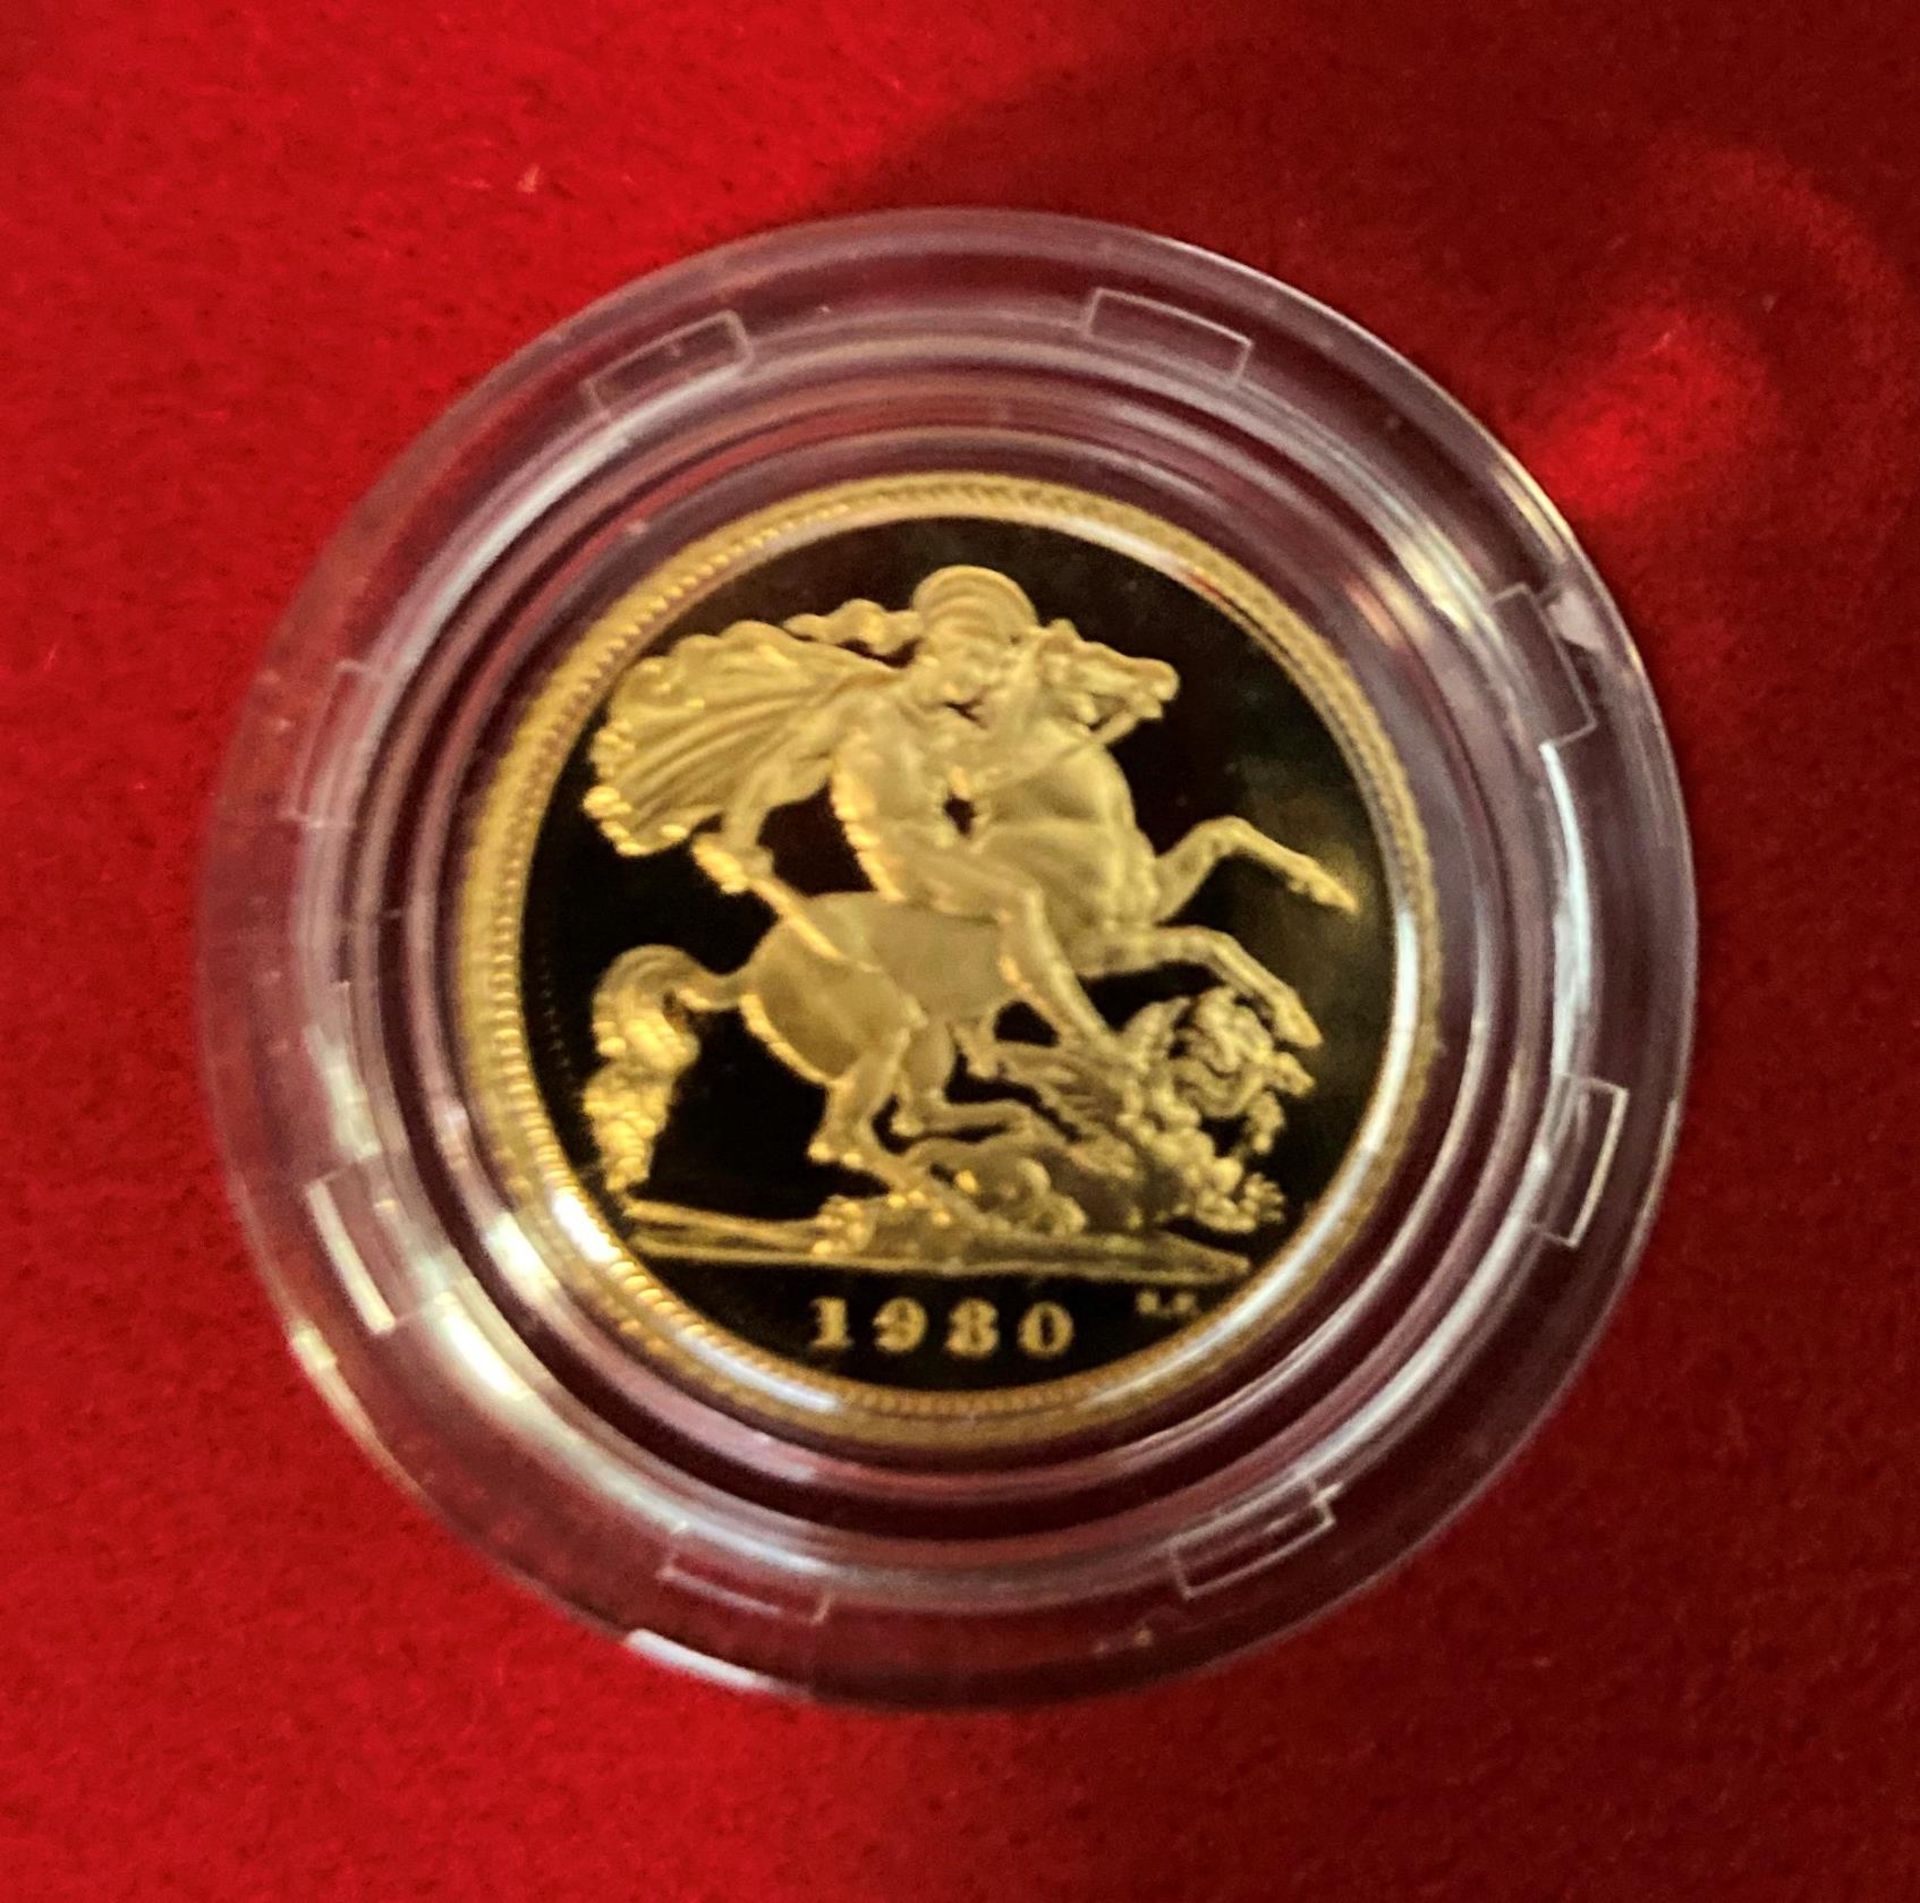 A Royal Mint 1980 Gold Proof Half-Sovereign in red case - Image 3 of 3